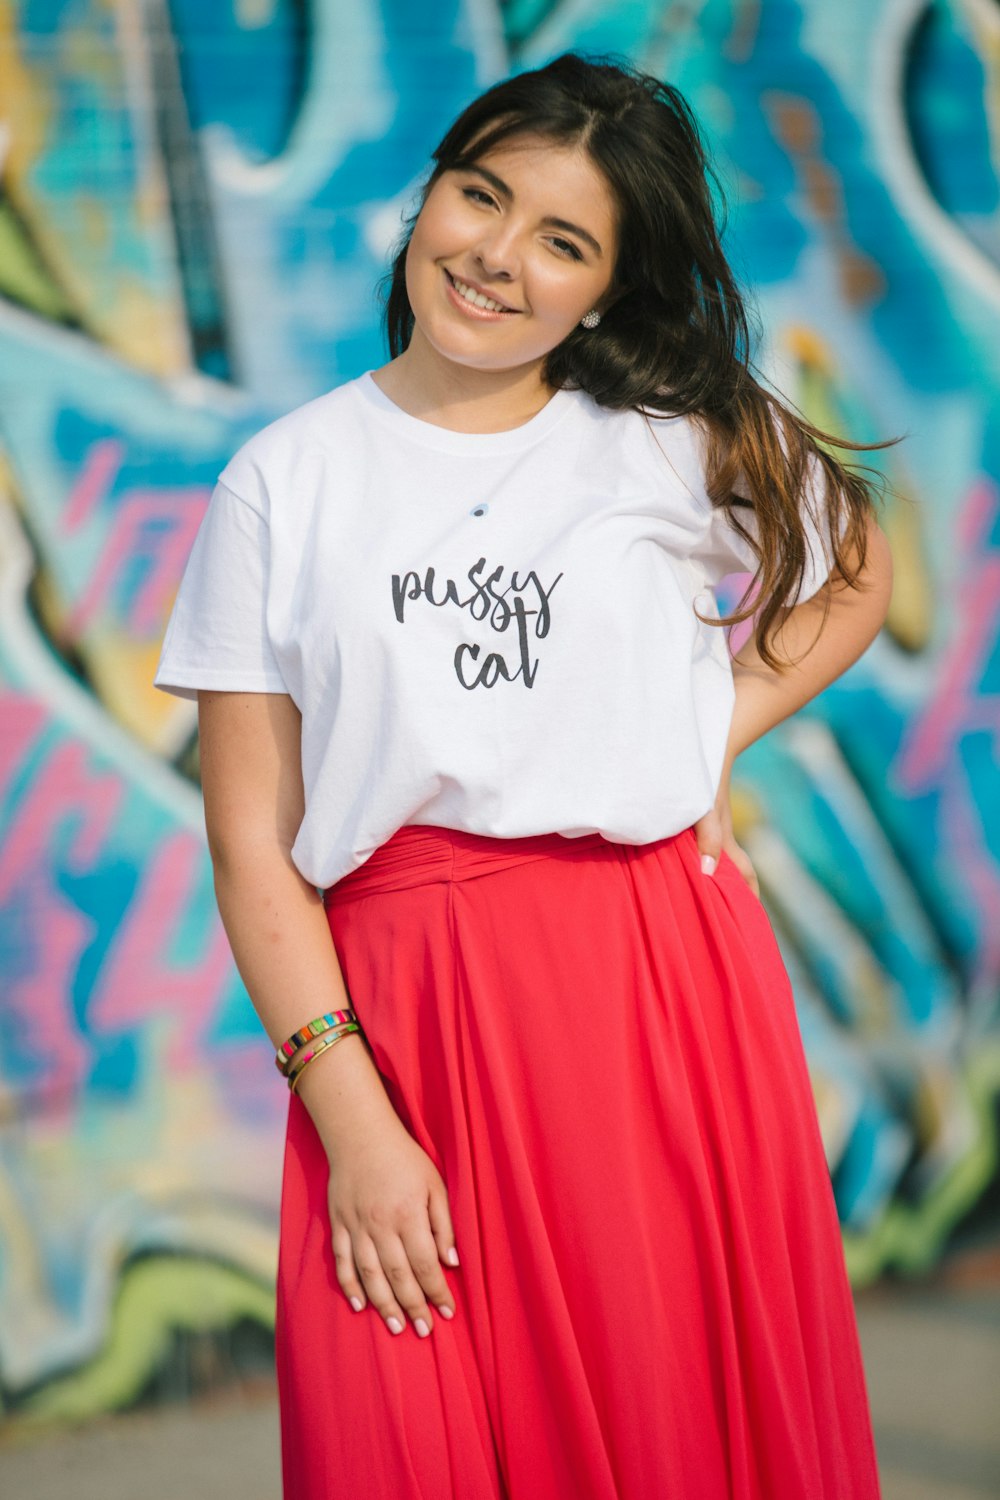 Woman in white crew neck t-shirt and red skirt photo – Free Smiling woman  Image on Unsplash